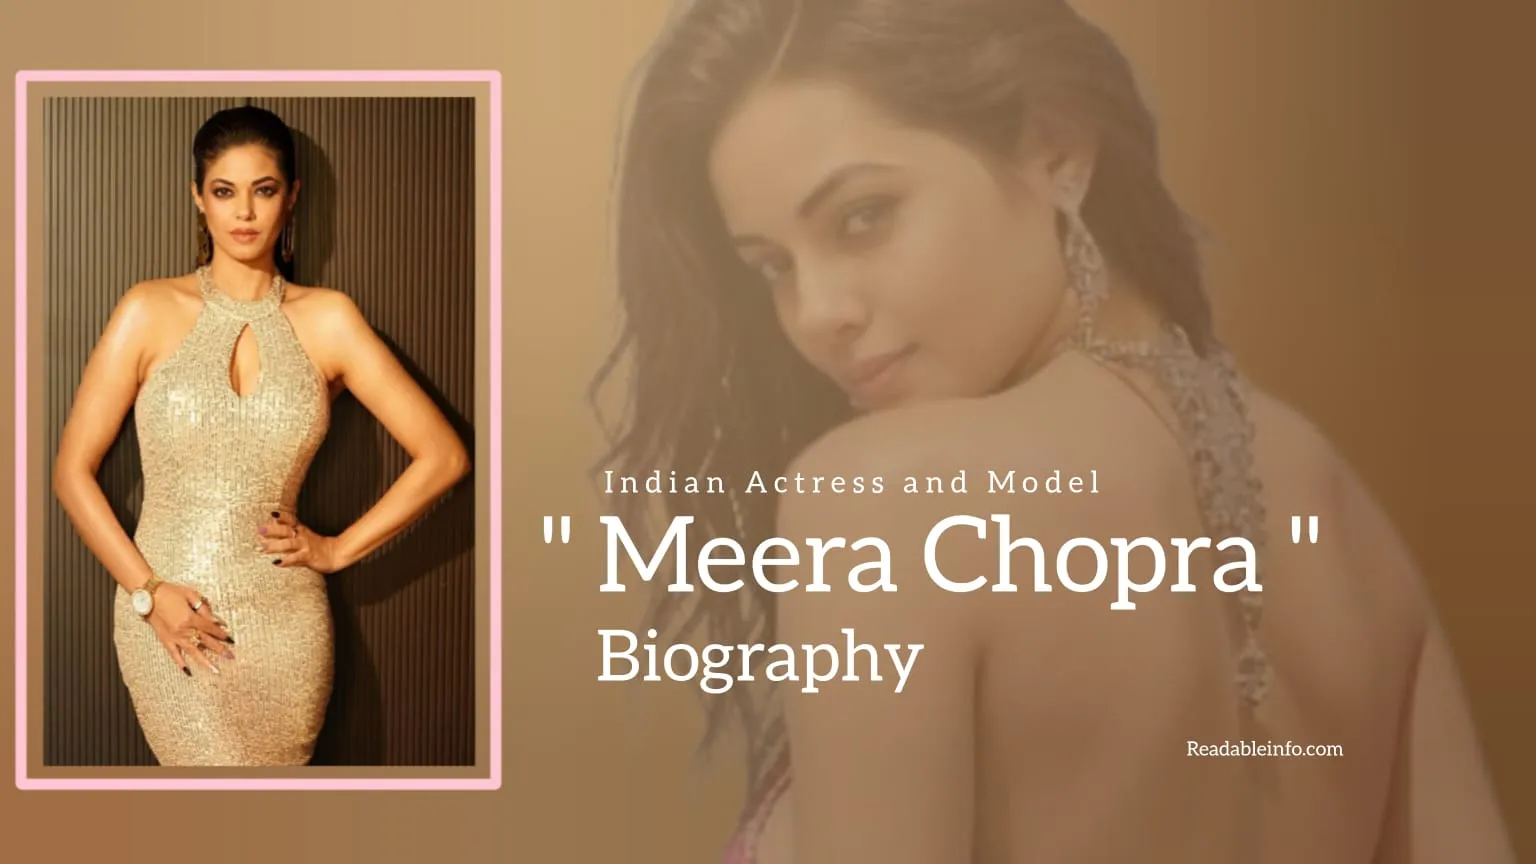 You are currently viewing Meera Chopra Biography (Indian Actress and Model)